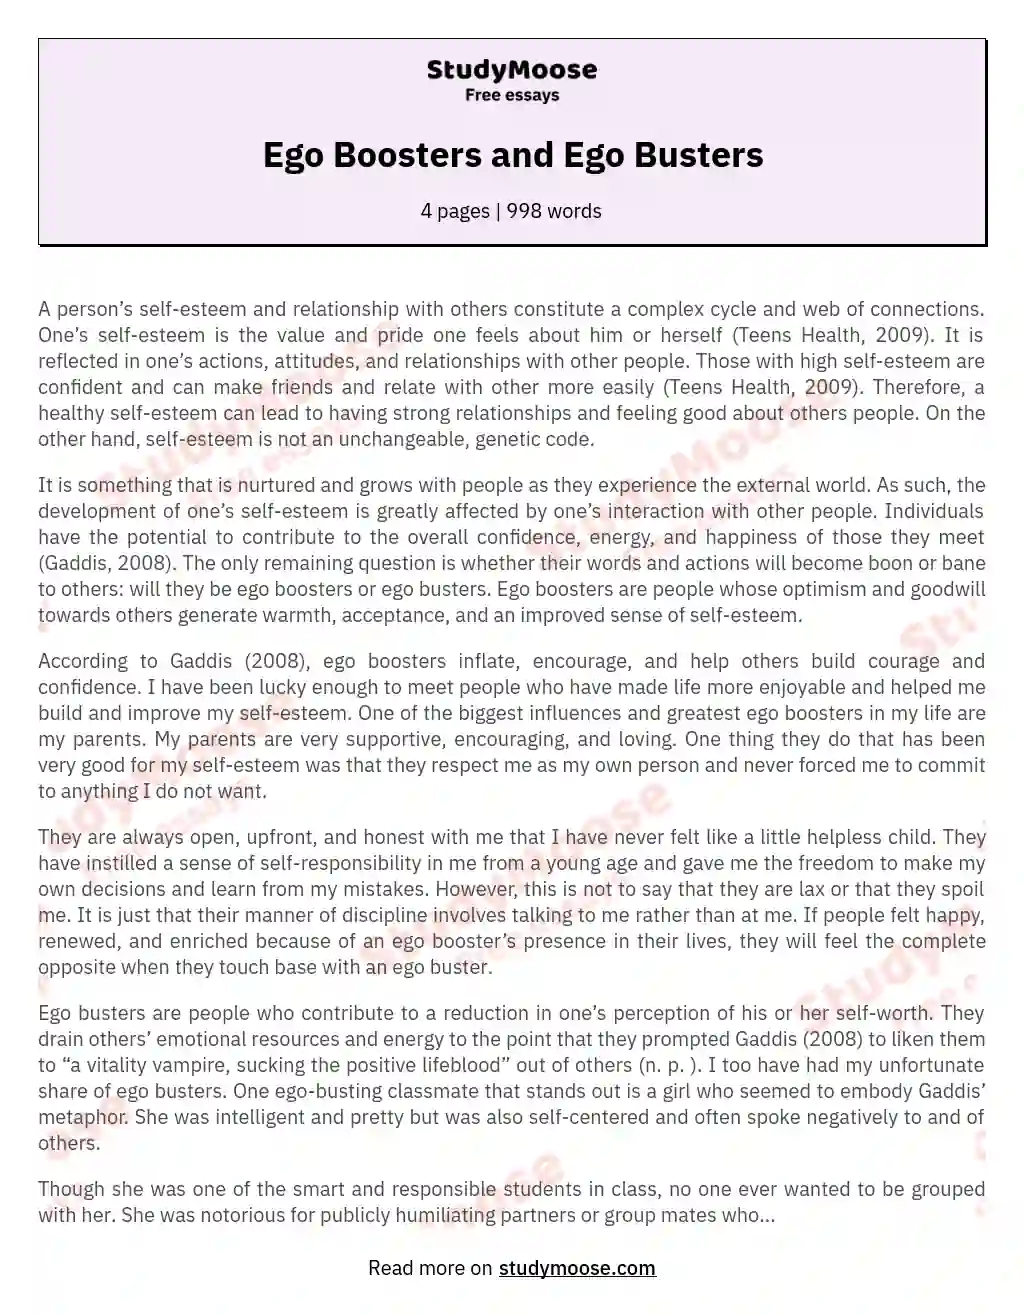 Ego Boosters and Ego Busters essay